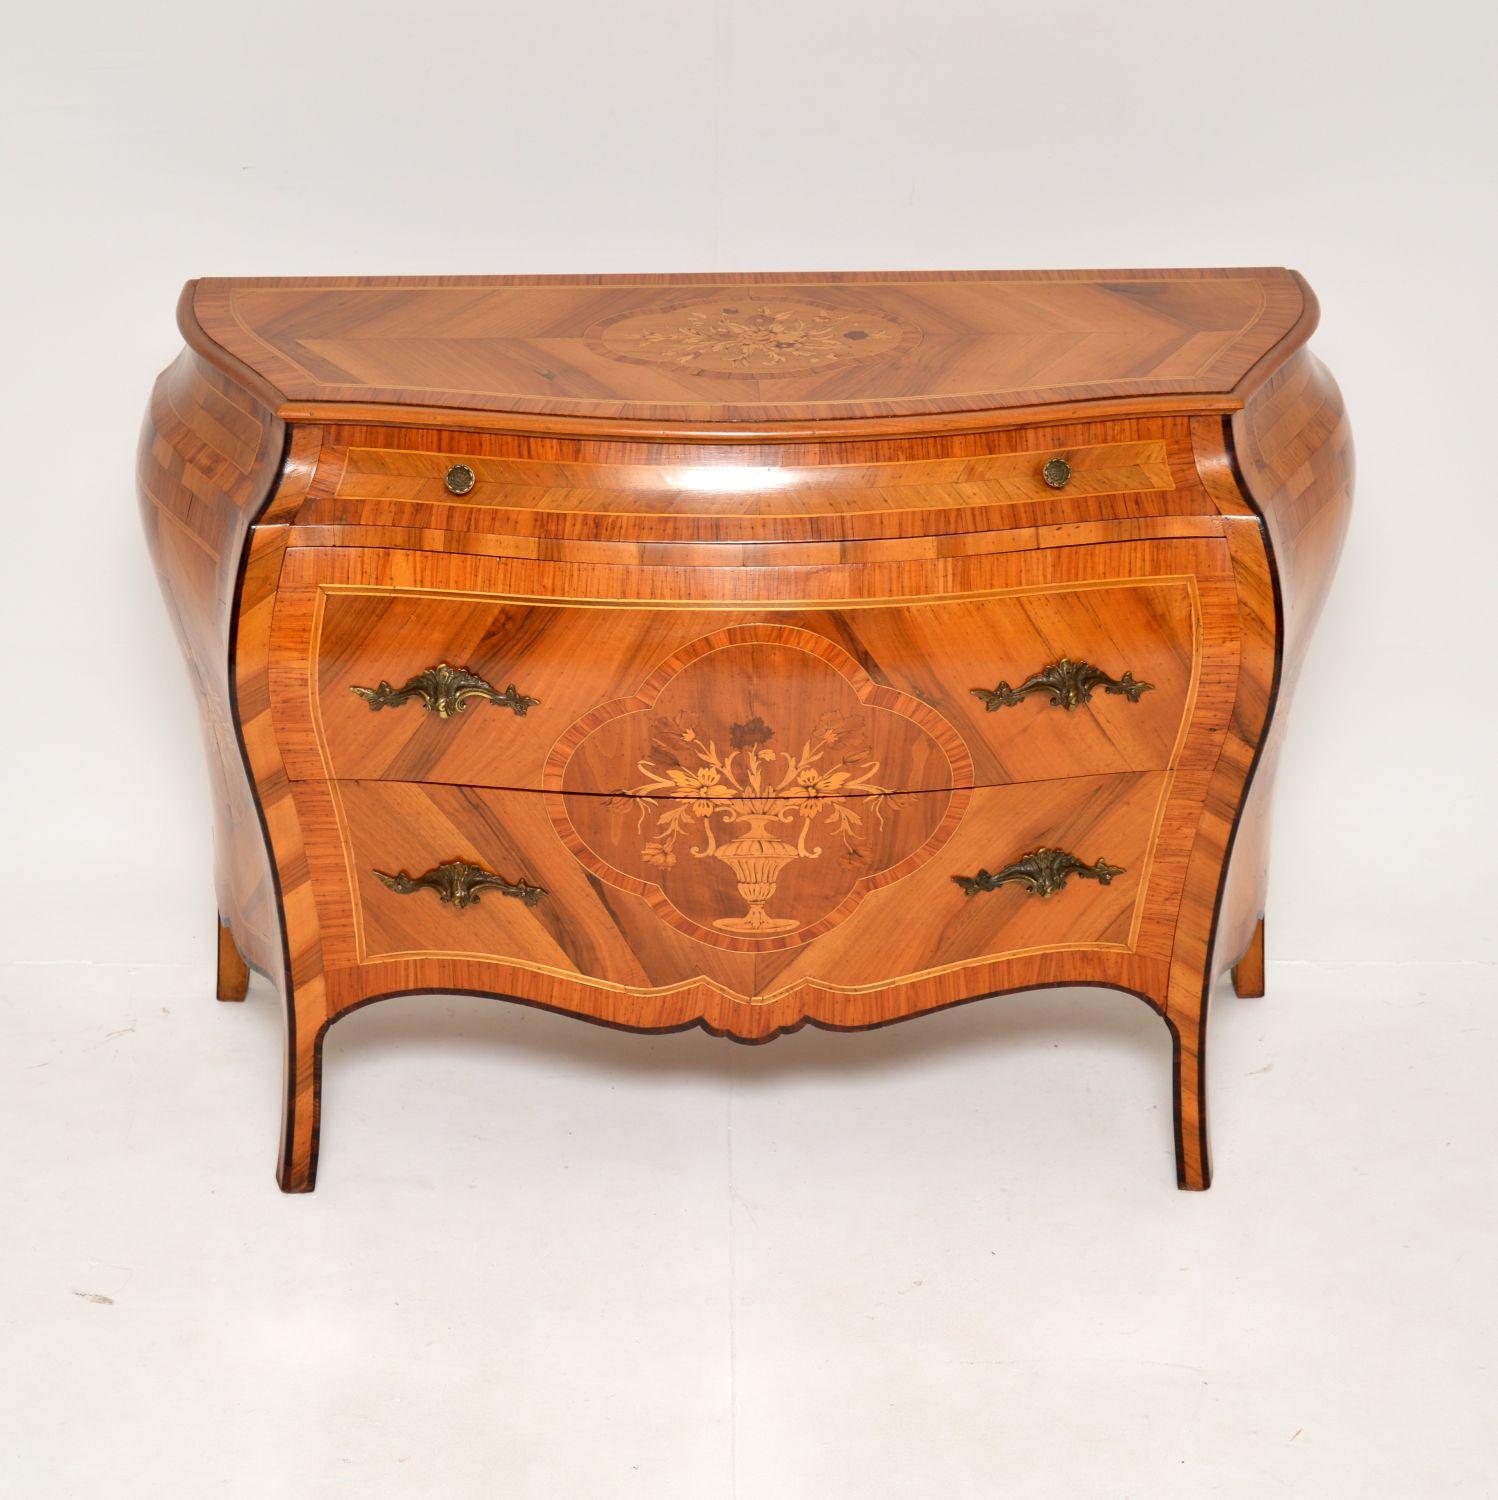 An absolutely beautiful antique Bombe commode made from olive wood. This was made in Holland, it dates from around the 1900-1910 period.

It is of extremely fine quality and is a great size too. The olive wood has a beautiful colour tone and